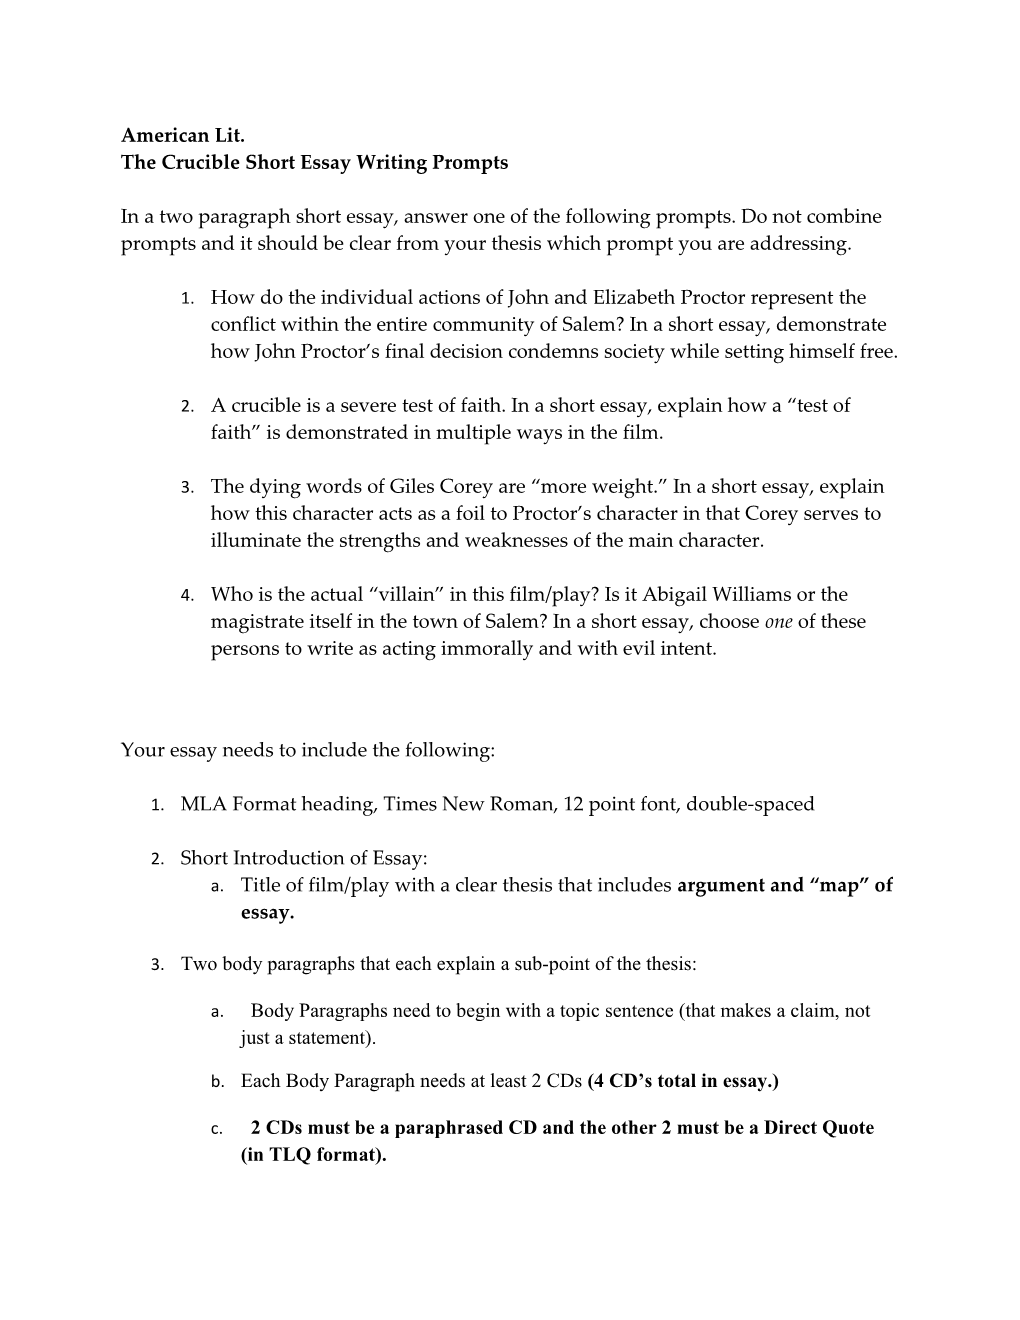 The Crucible Short Essay Writing Prompts